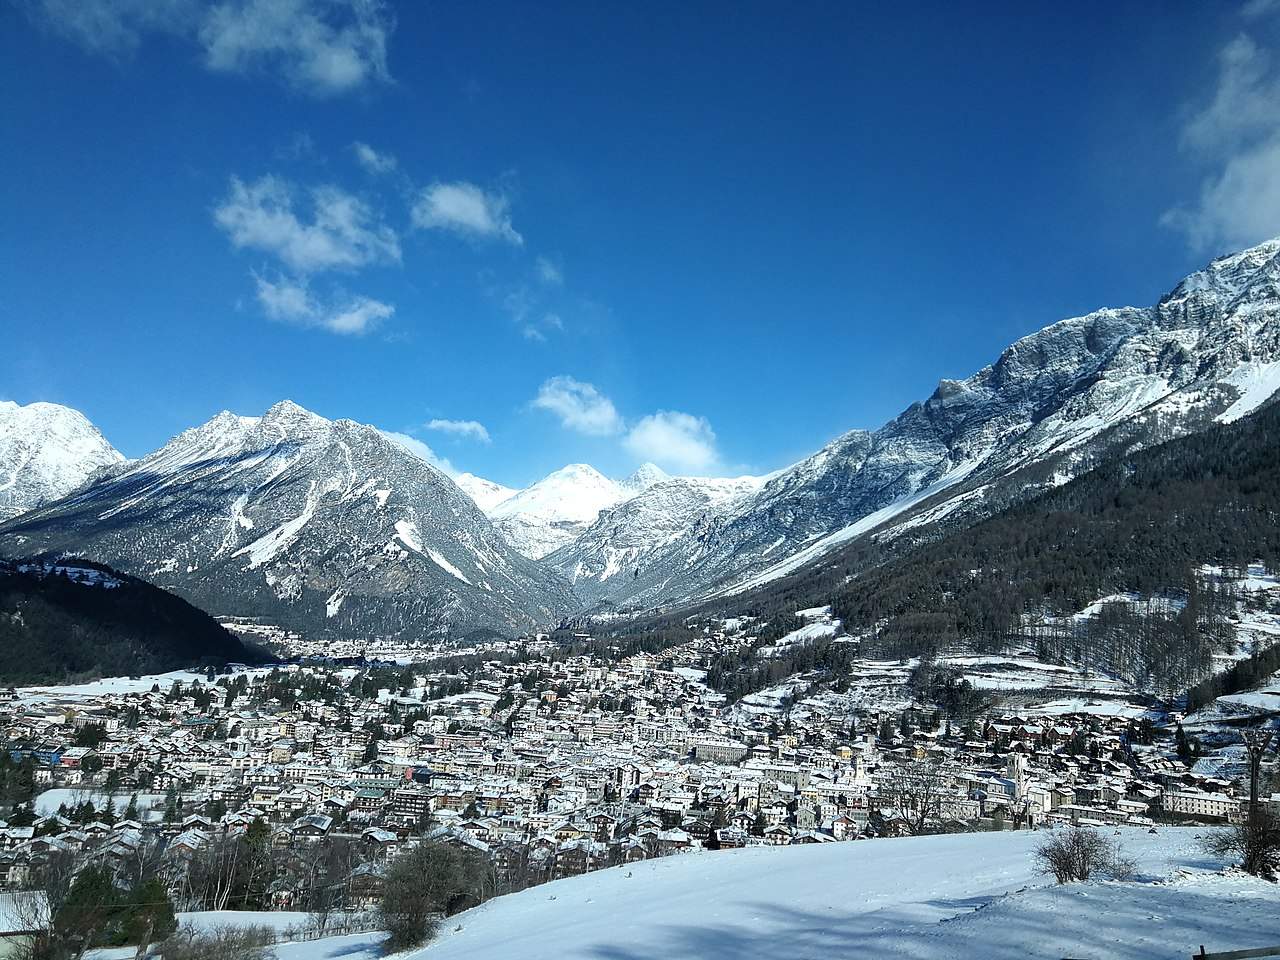 Valtellina, what to see: 10 places not to be missed